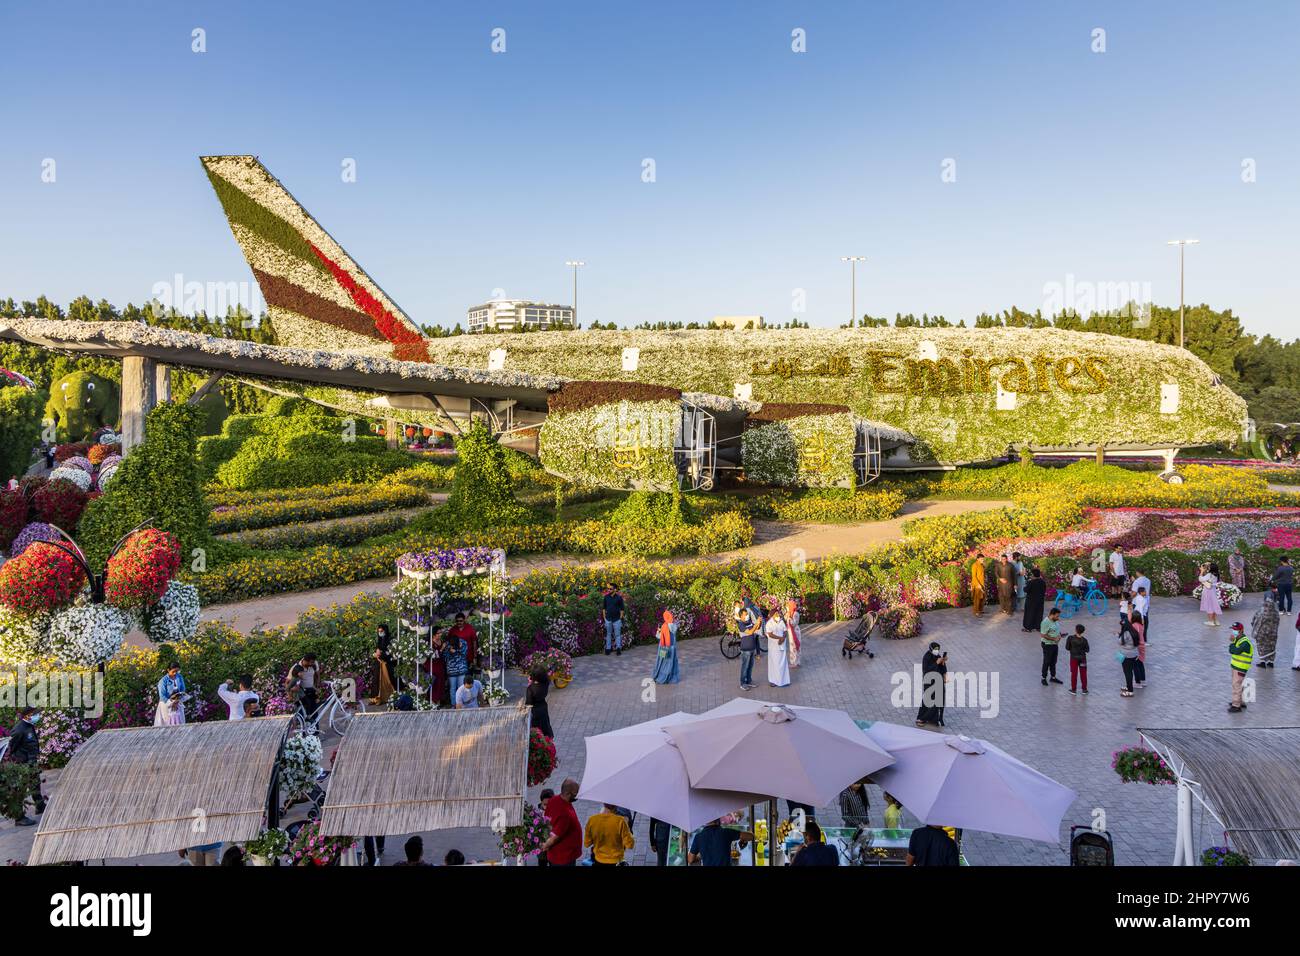 A flower-covered Emirates Airbus A380 at the Dubai Miracle Garden, United Arab Emirates. Stock Photo